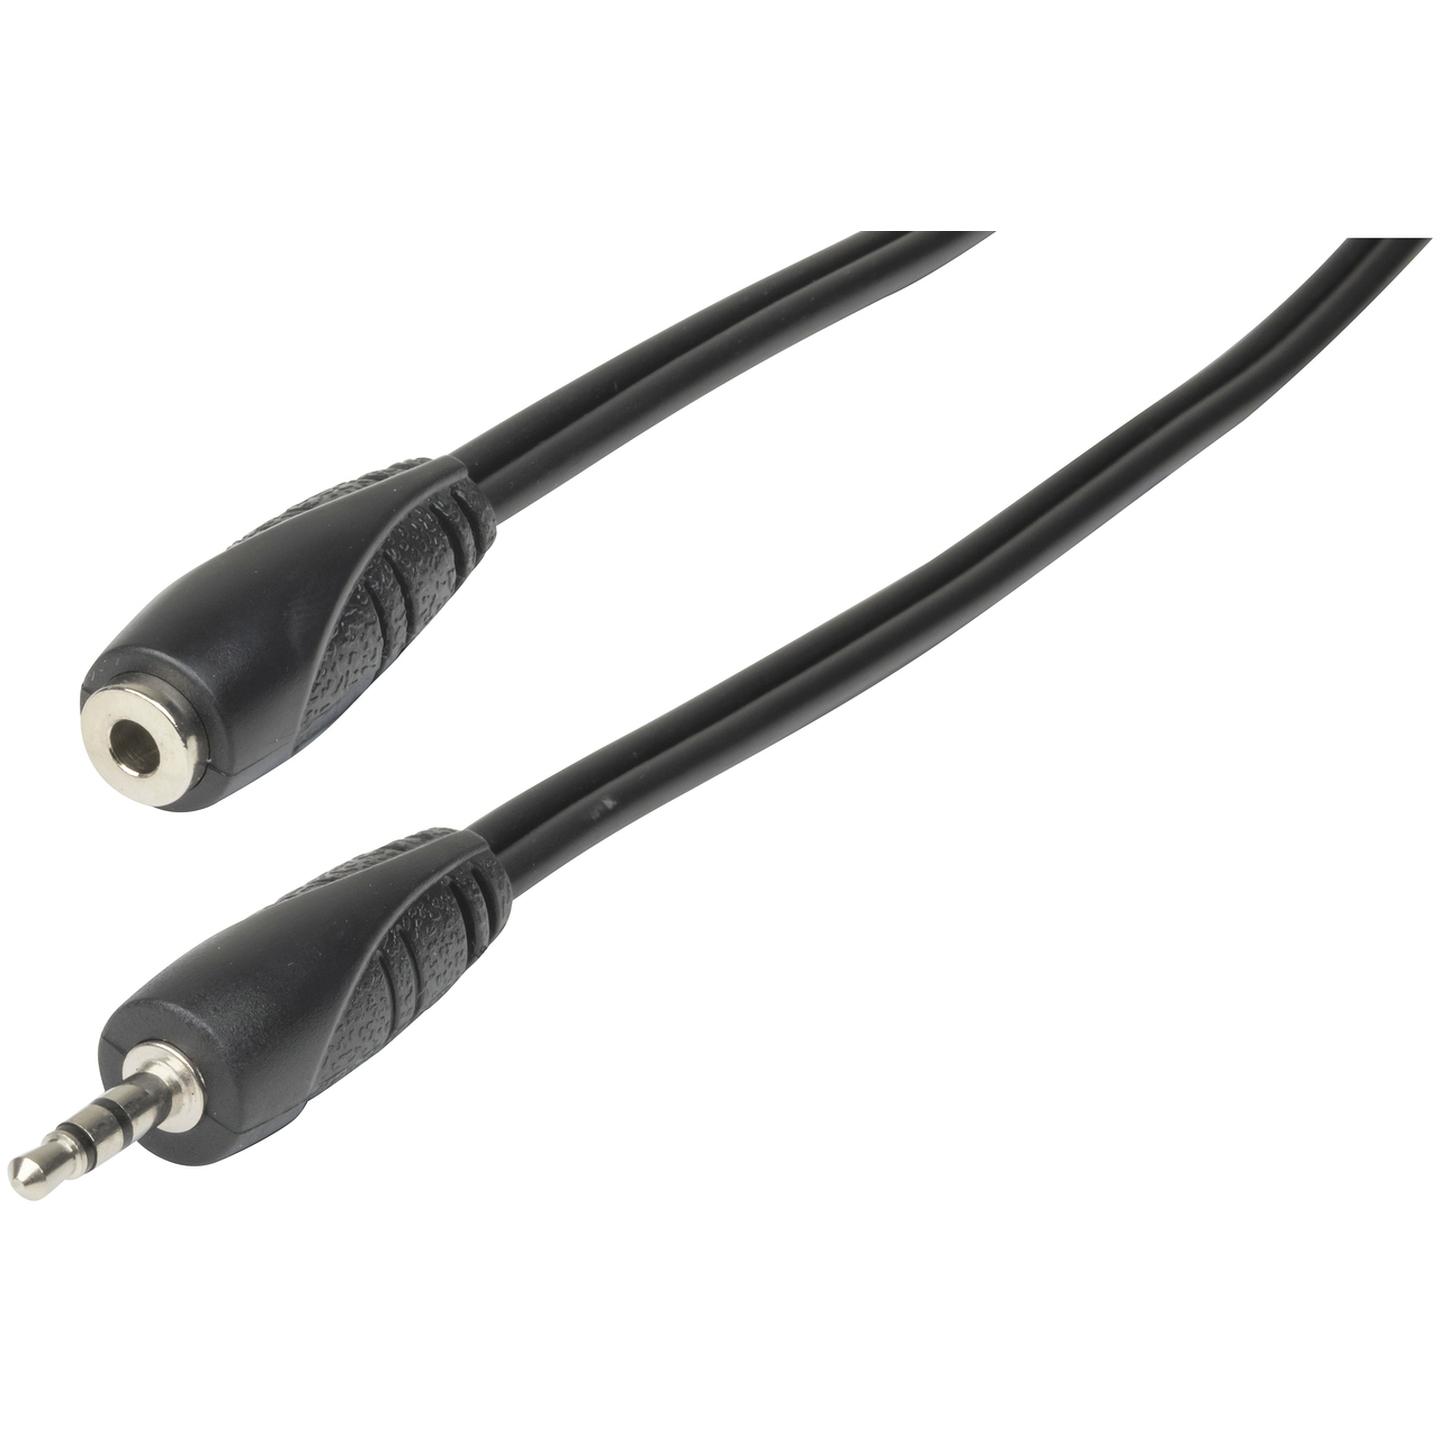 3.5mm Stereo Plug to 3.5mm Stereo Socket Audio Cable - 3m